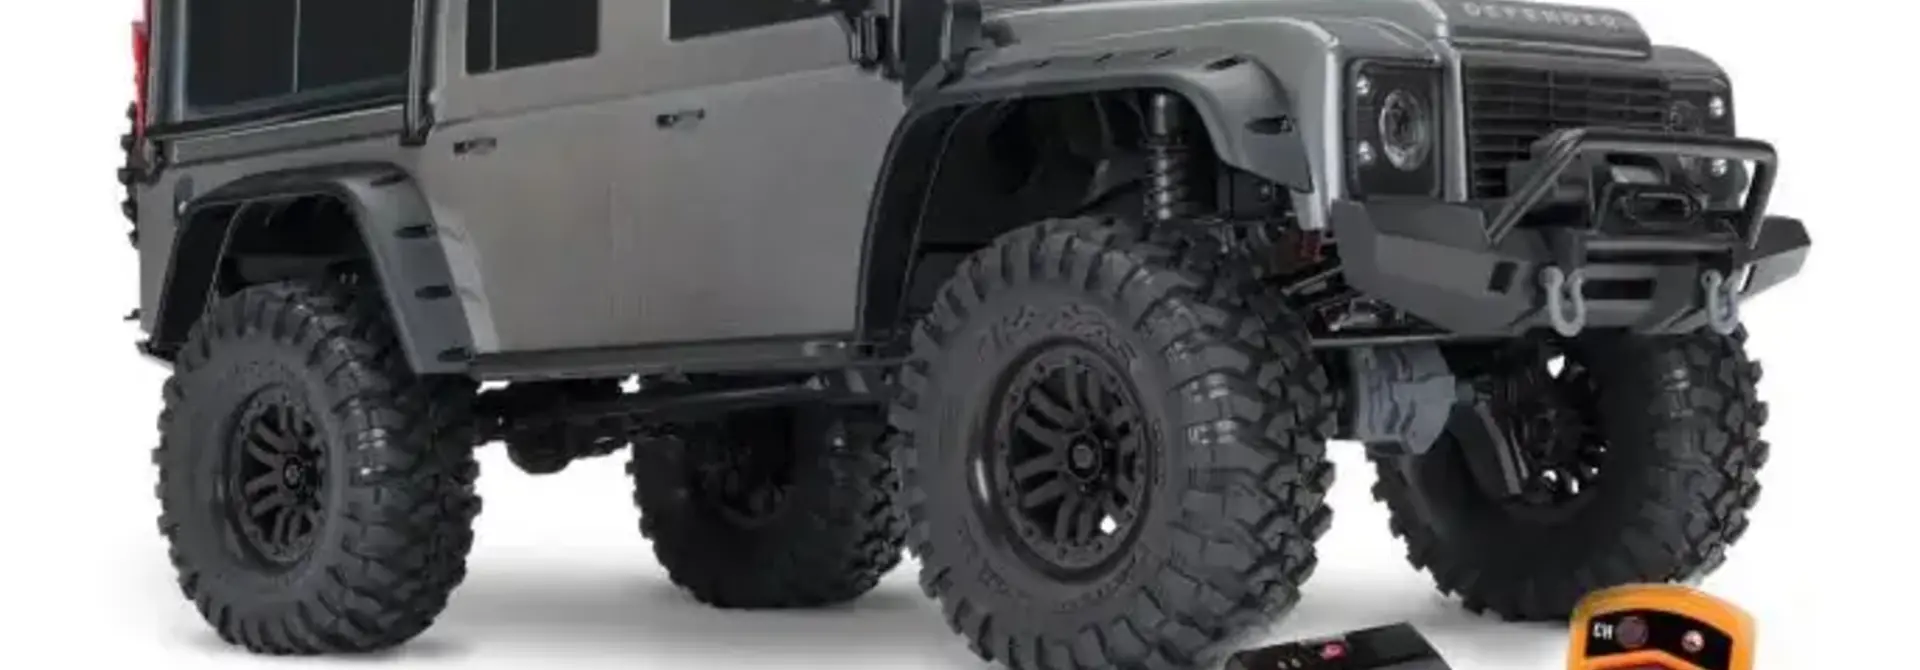 Traxxas Land Rover Defender Crawler with winch SILVER